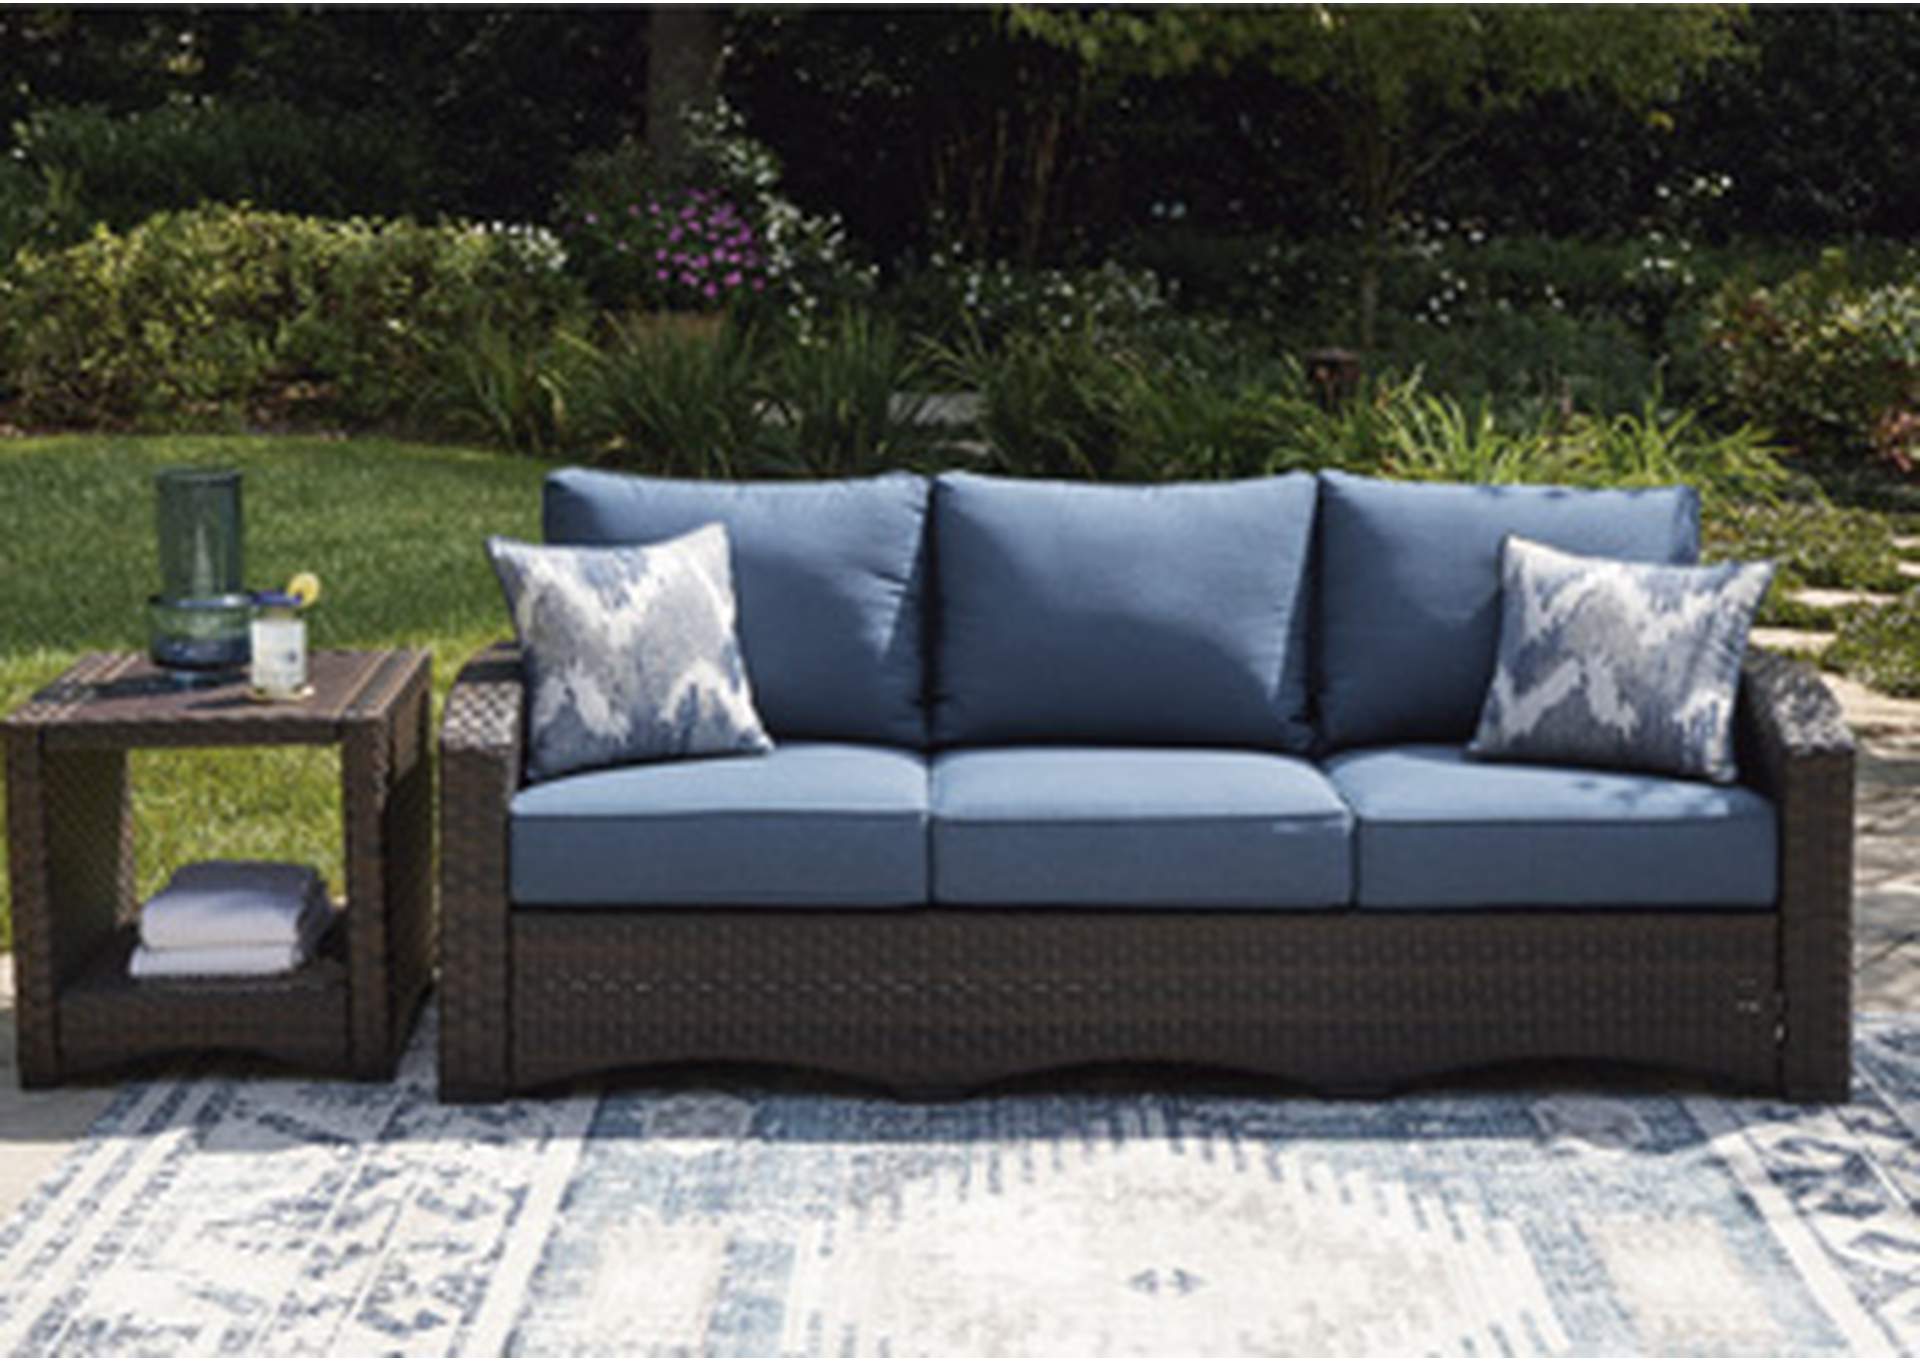 Windglow Outdoor Sofa with Cushion,Outdoor By Ashley